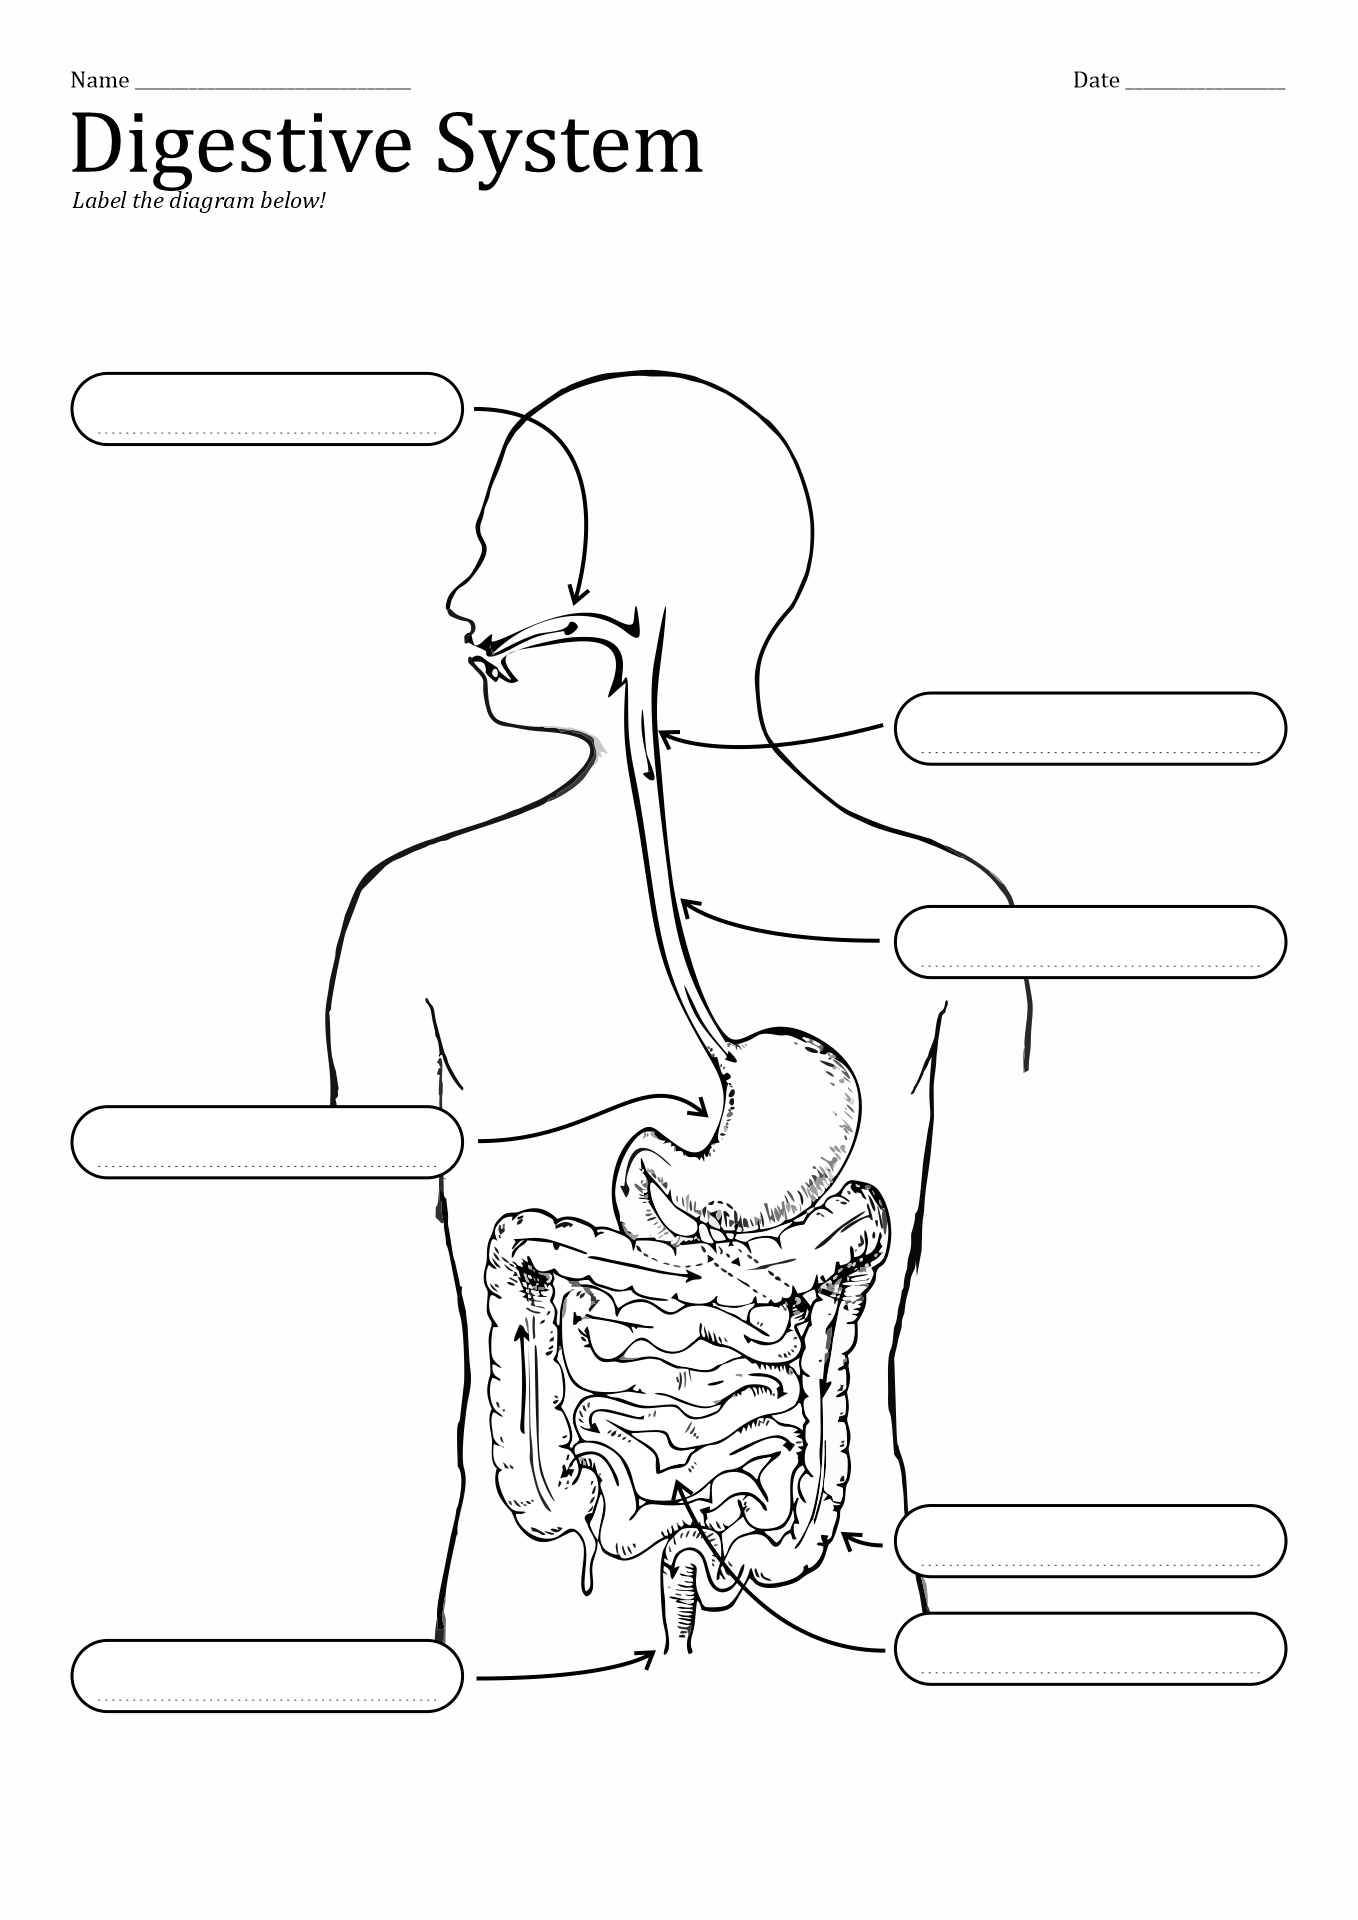 blank-digestive-tract-diagram